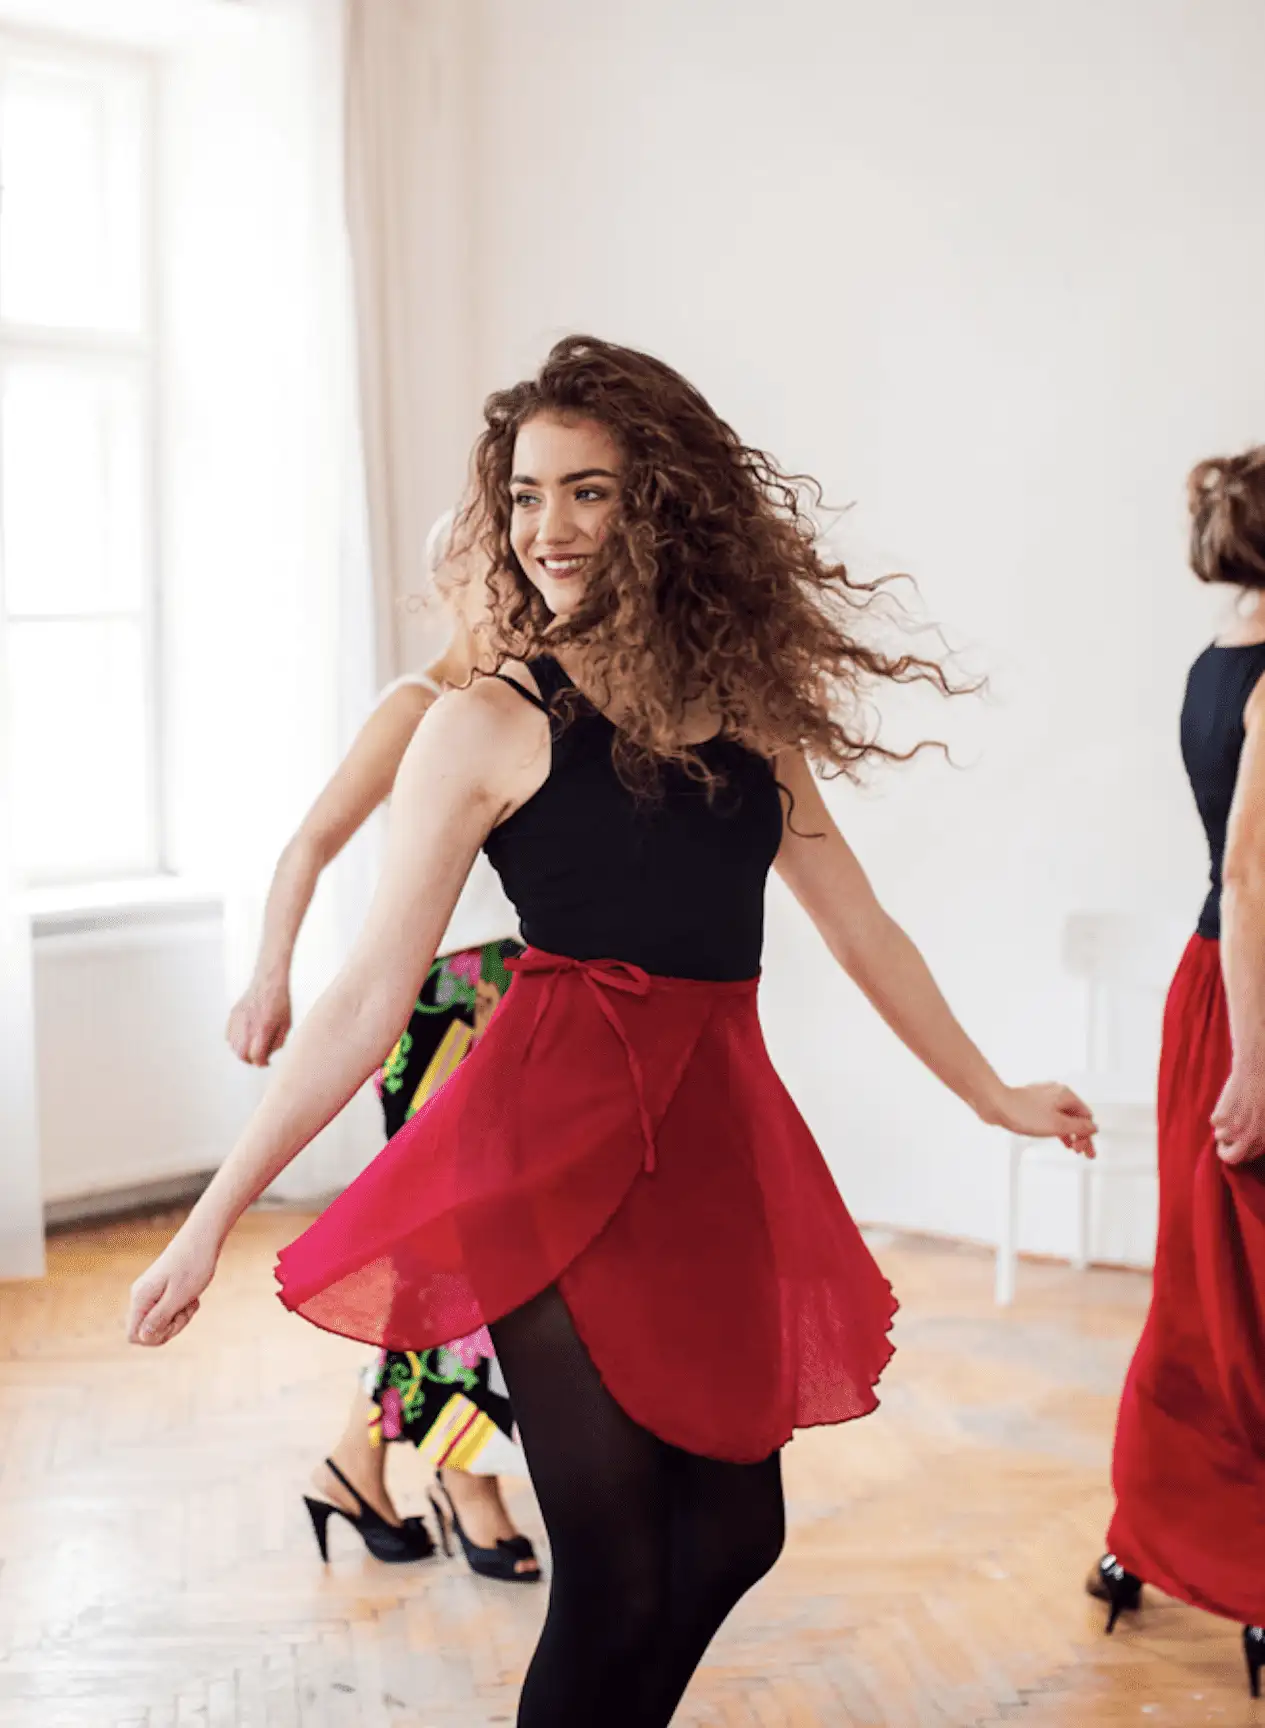 What To Wear To a Salsa Class - Look Great and Feel Comfortable on the Dance Floor